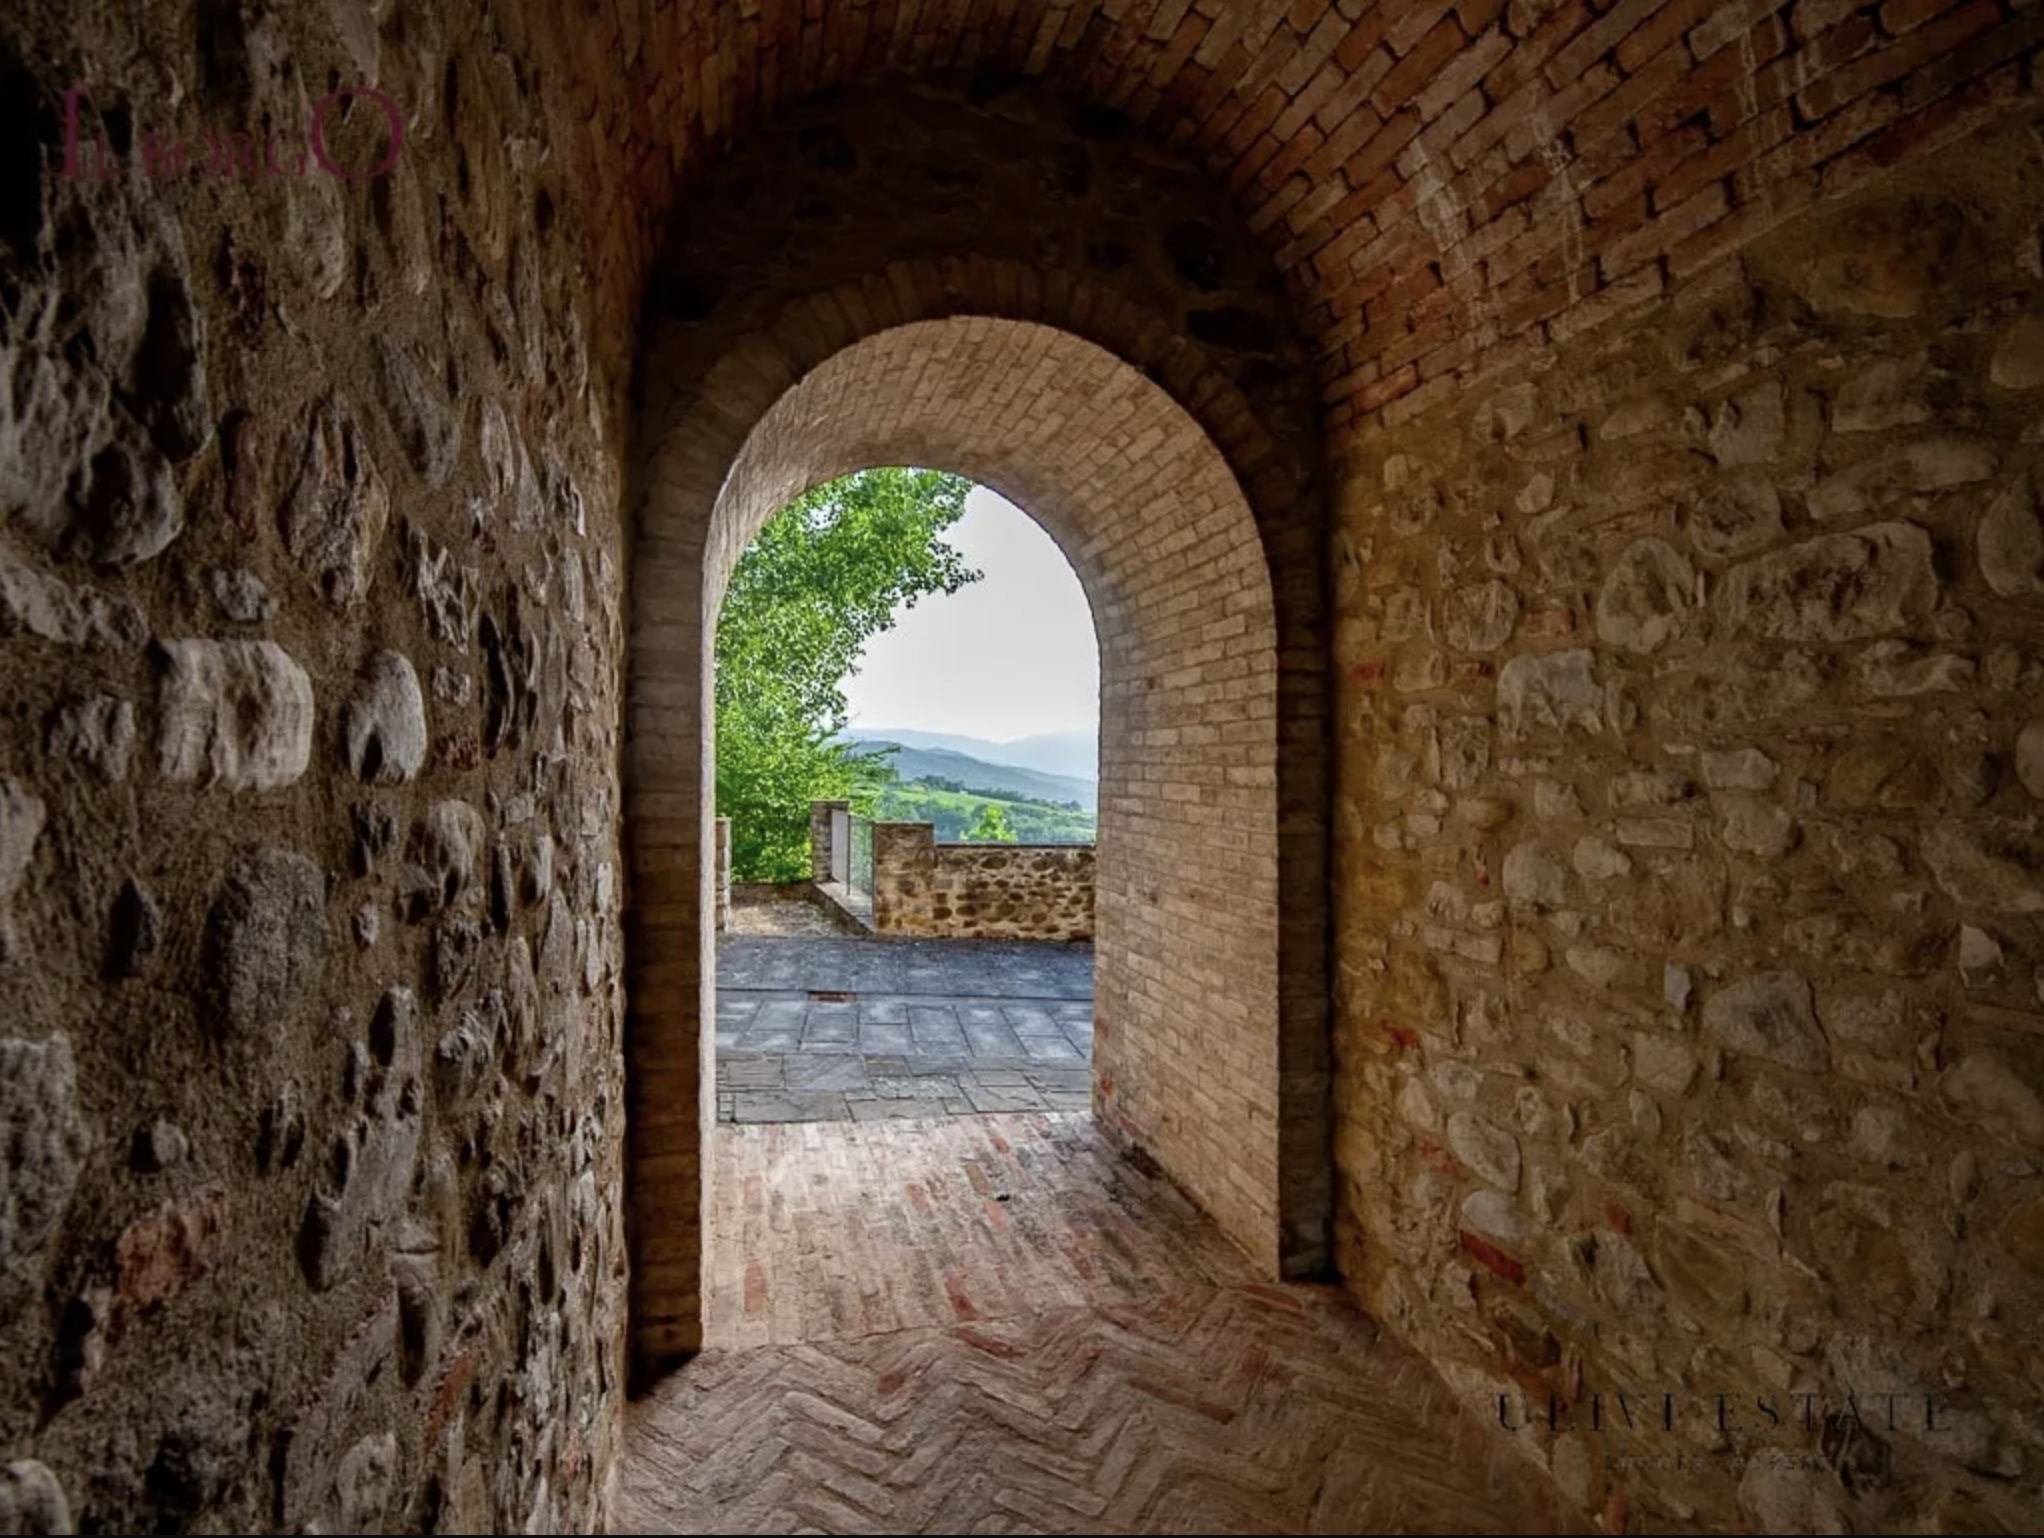 Francis York Borgo Pieve di Comunaglia in Umbria, Italy With 17 Country Houses, 1000-Year-Old Church, Vineyards 00013.png